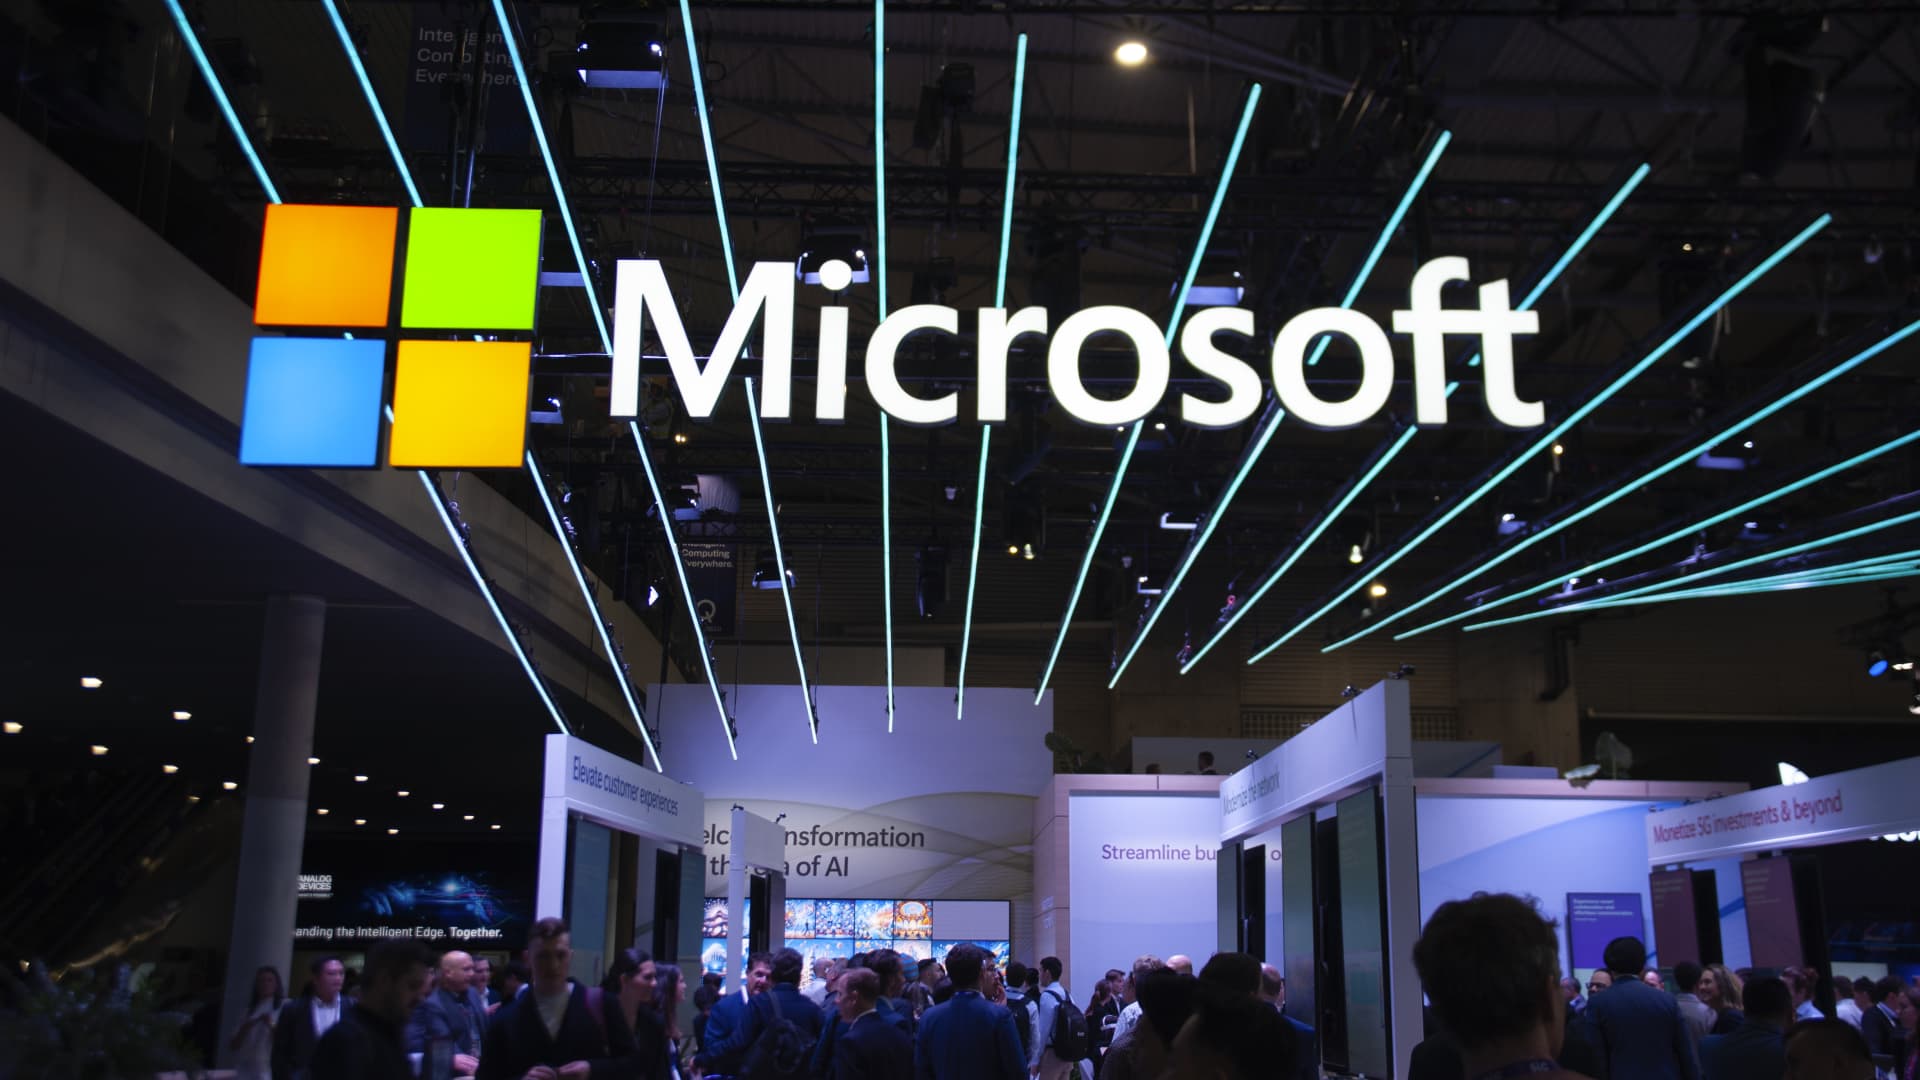 Spanish startups hit Microsoft with complaint over cloud practices